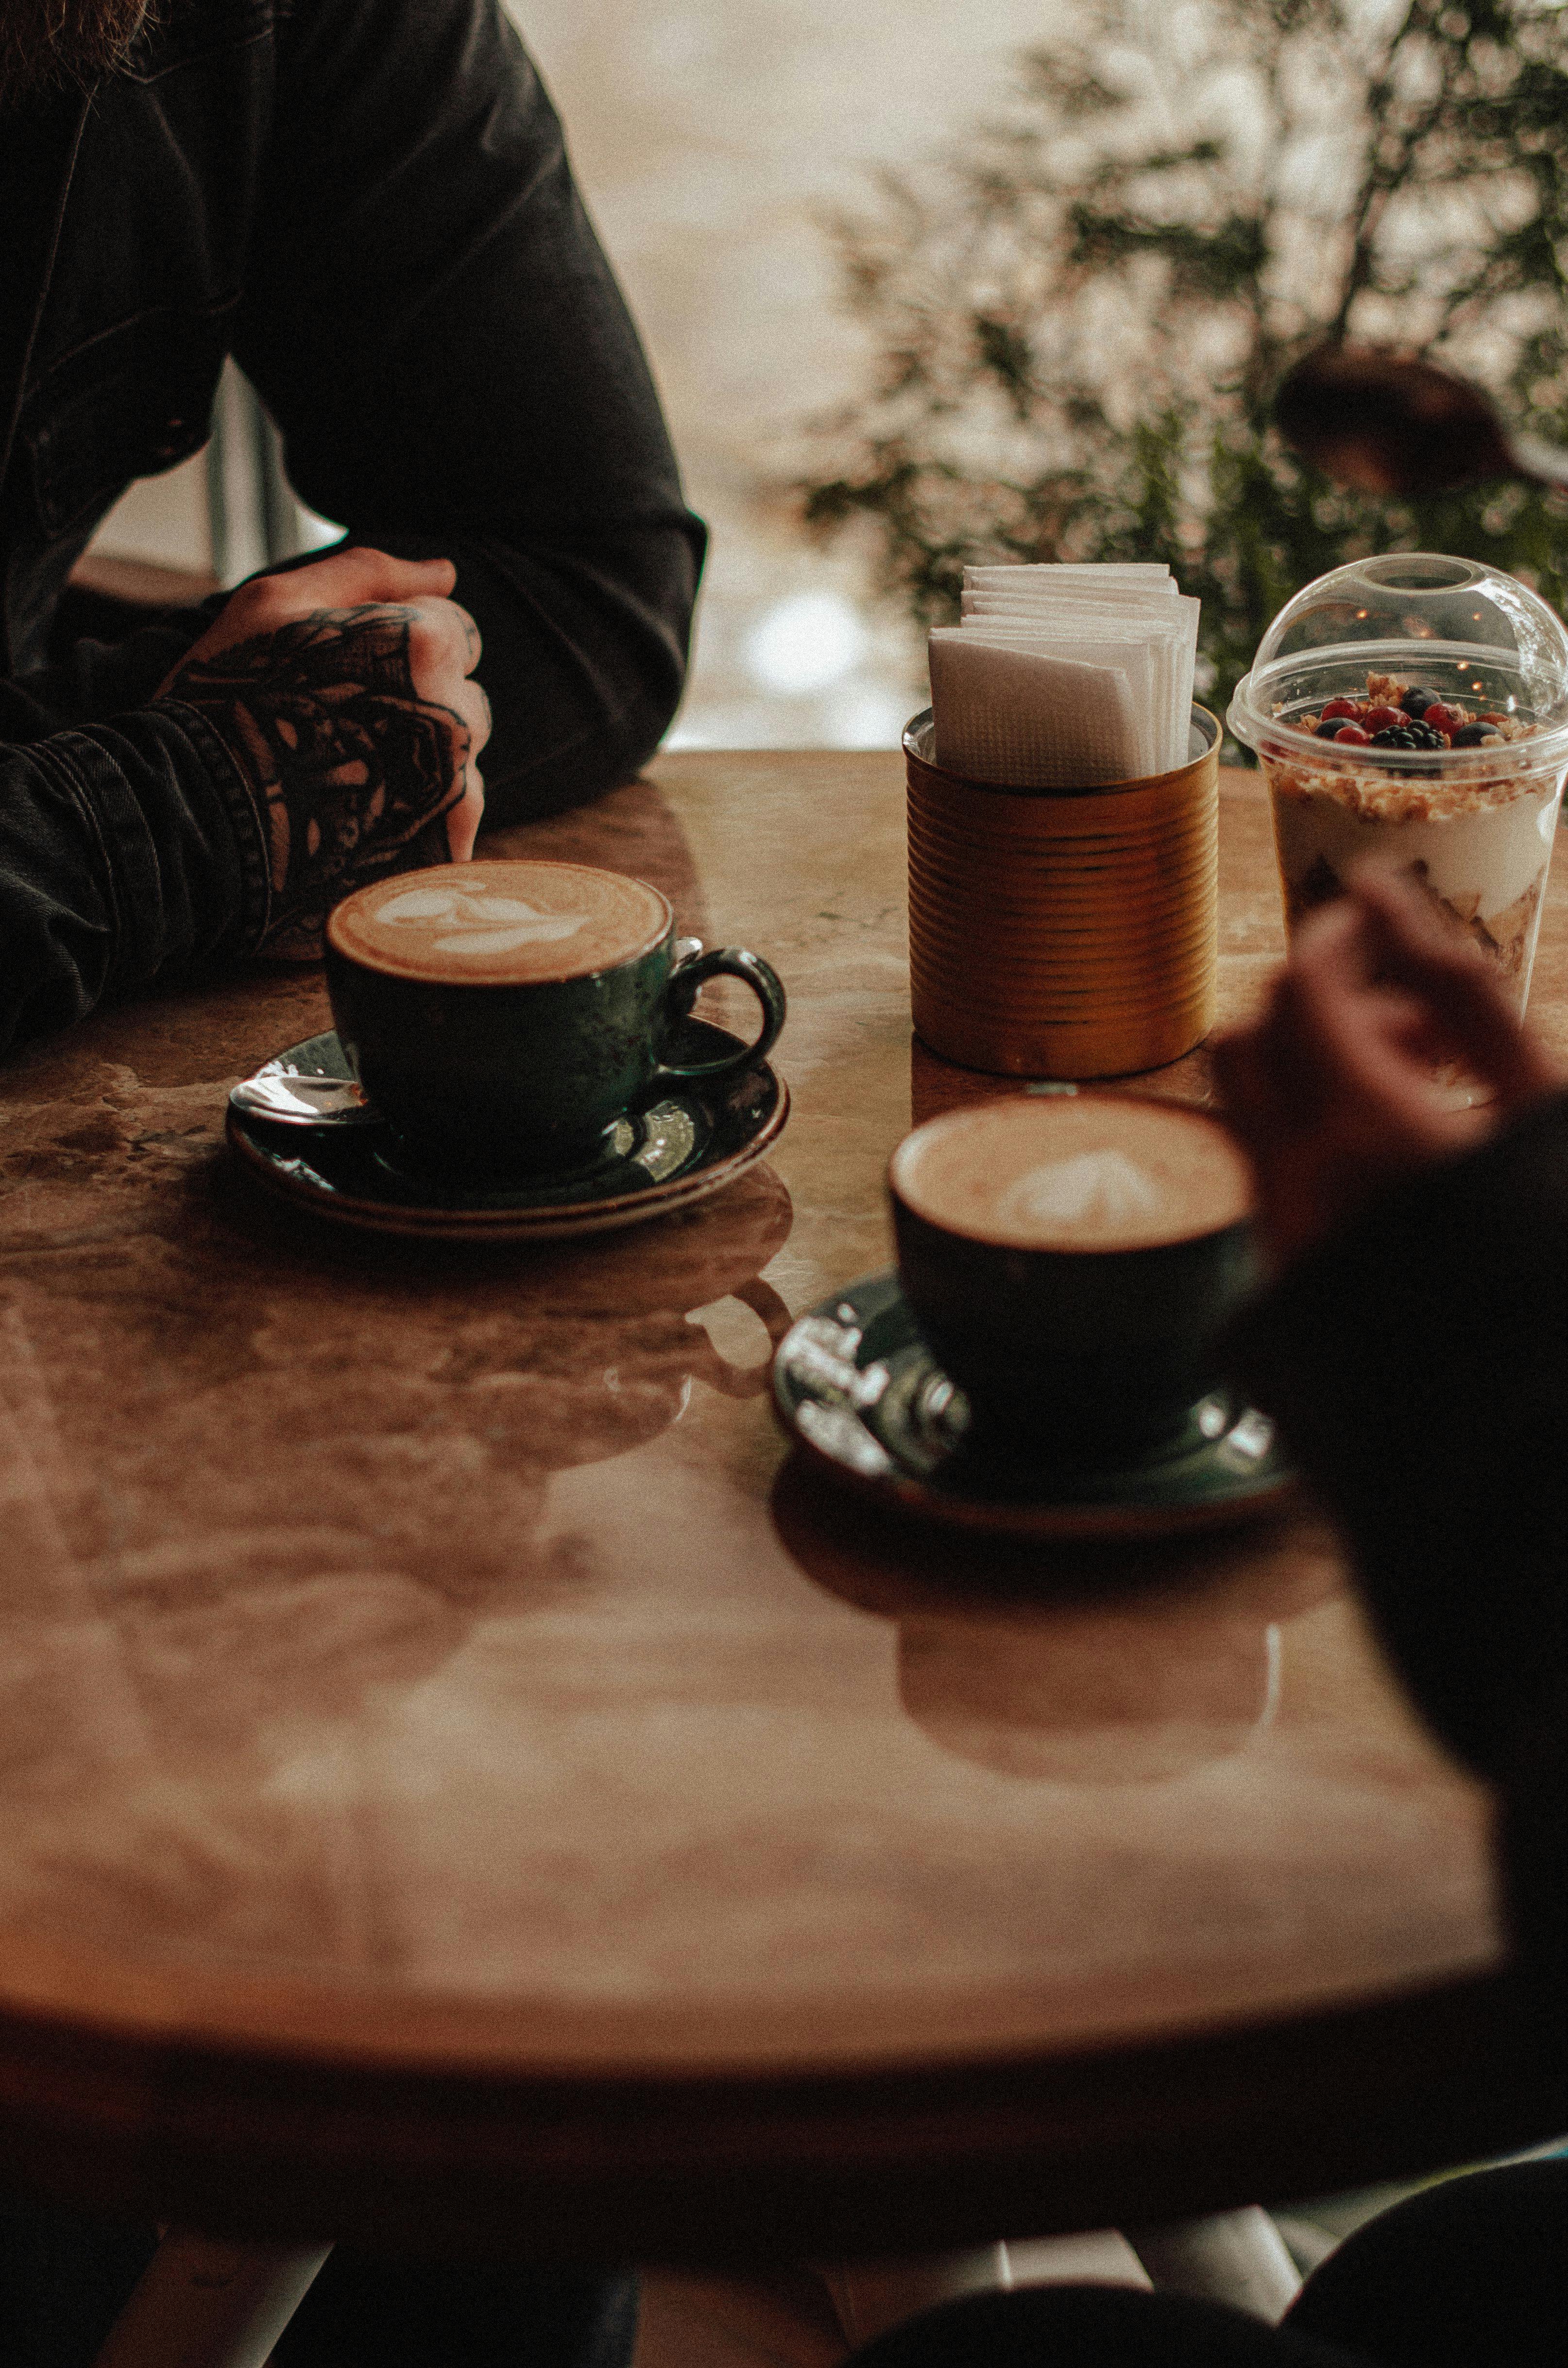 People in a Cafe with Coffee on the Table · Free Stock Photo